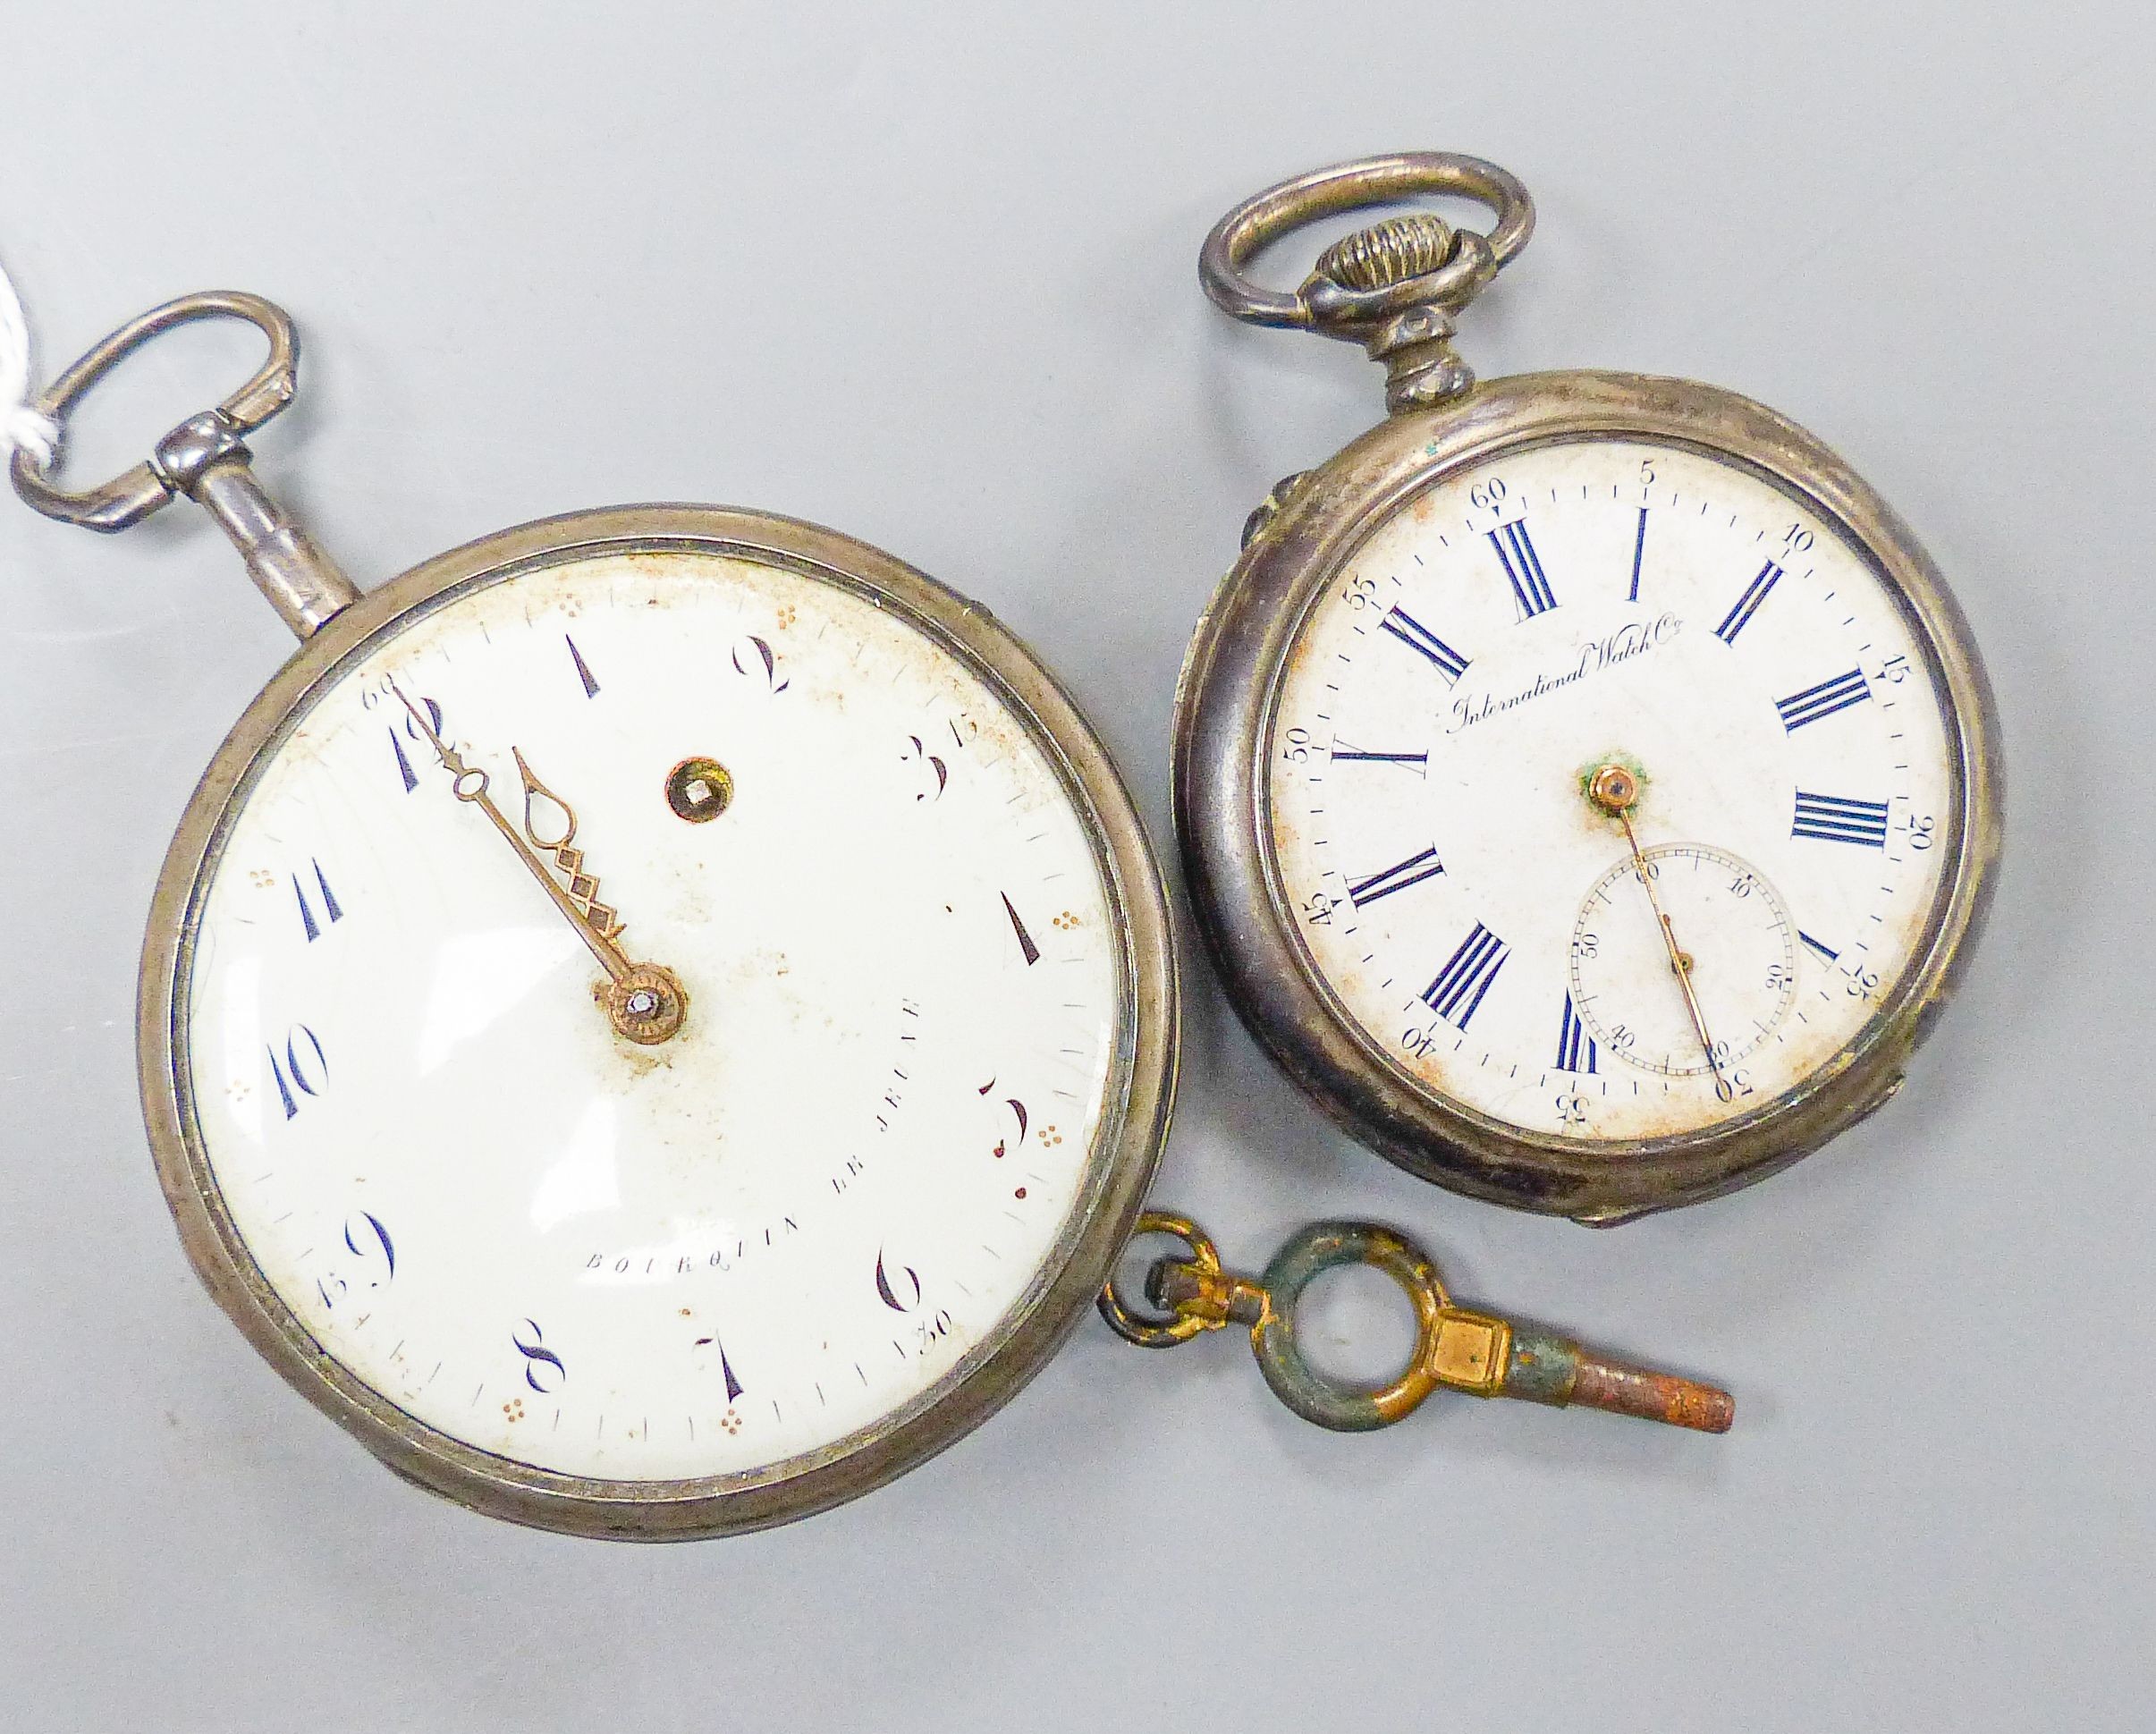 A late 18th century French silver keywind pocket watch by Borguin le Jeune, chain driven and with white enamel dial (lacking glass), case diameter 6cm. and an IWC 800 standard pocket watch.